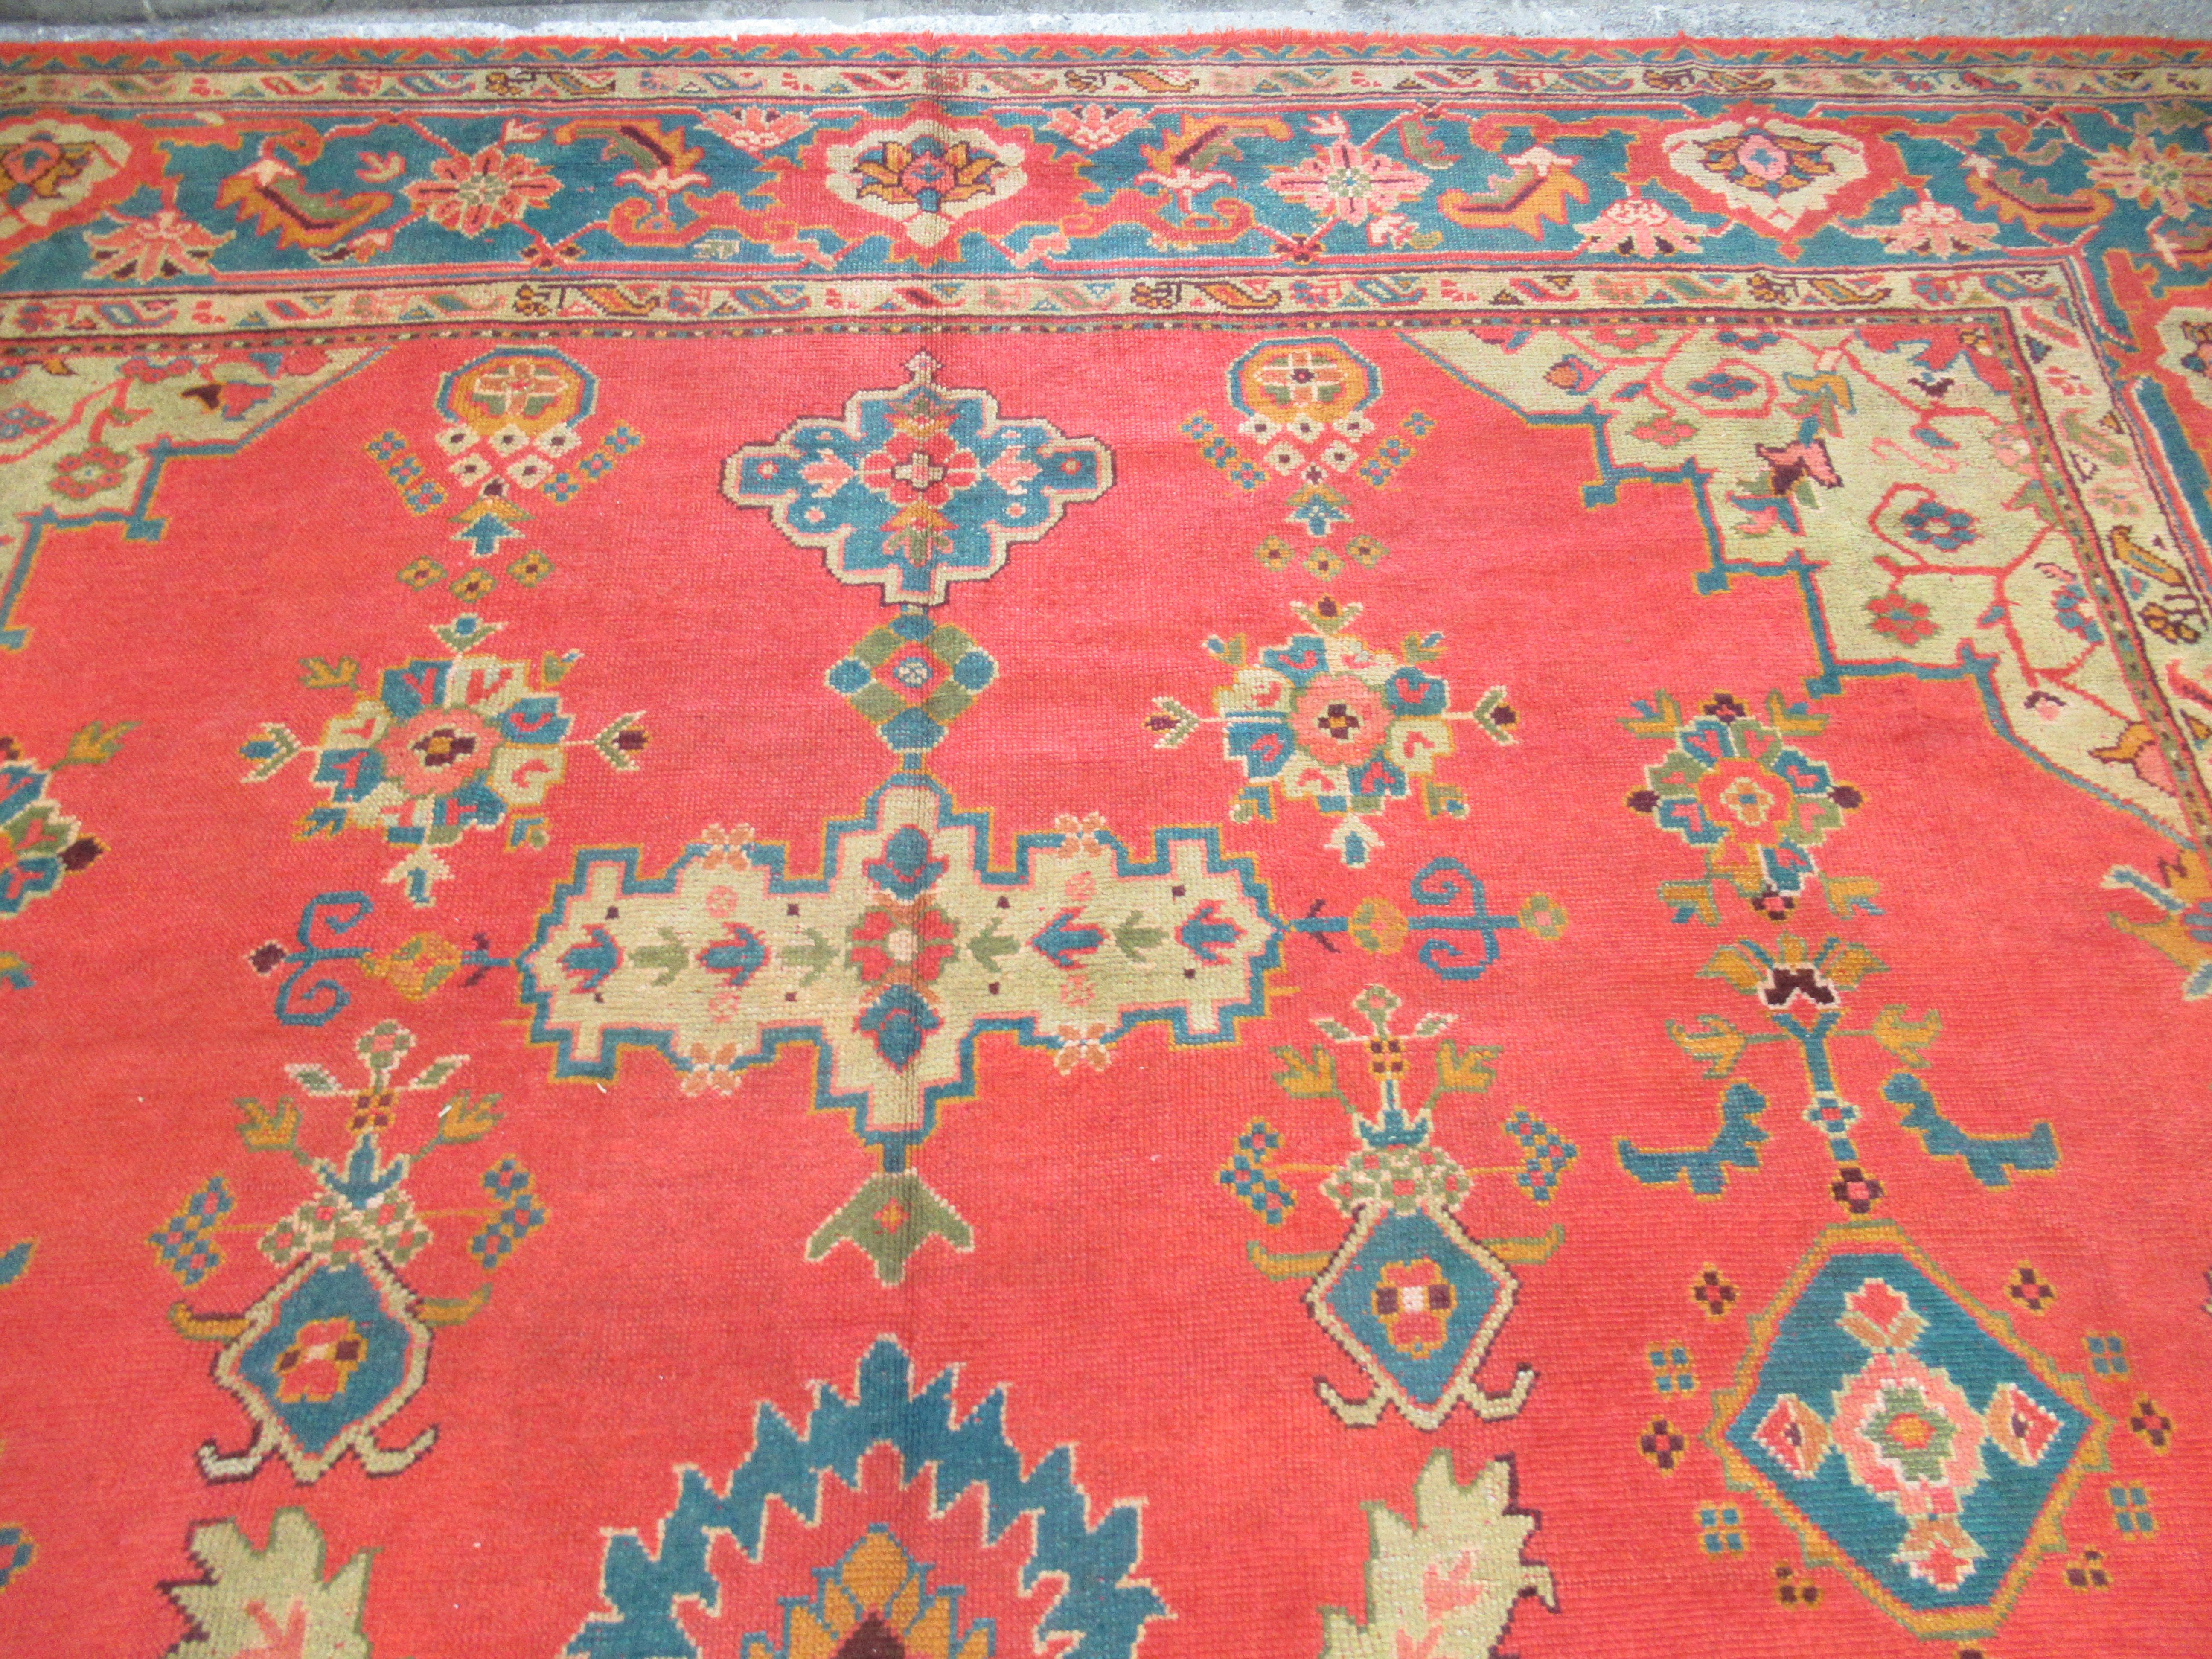 Hand-Woven Antique Turkish Oushak Carpet of Outstanding Colour with a Small Medallion